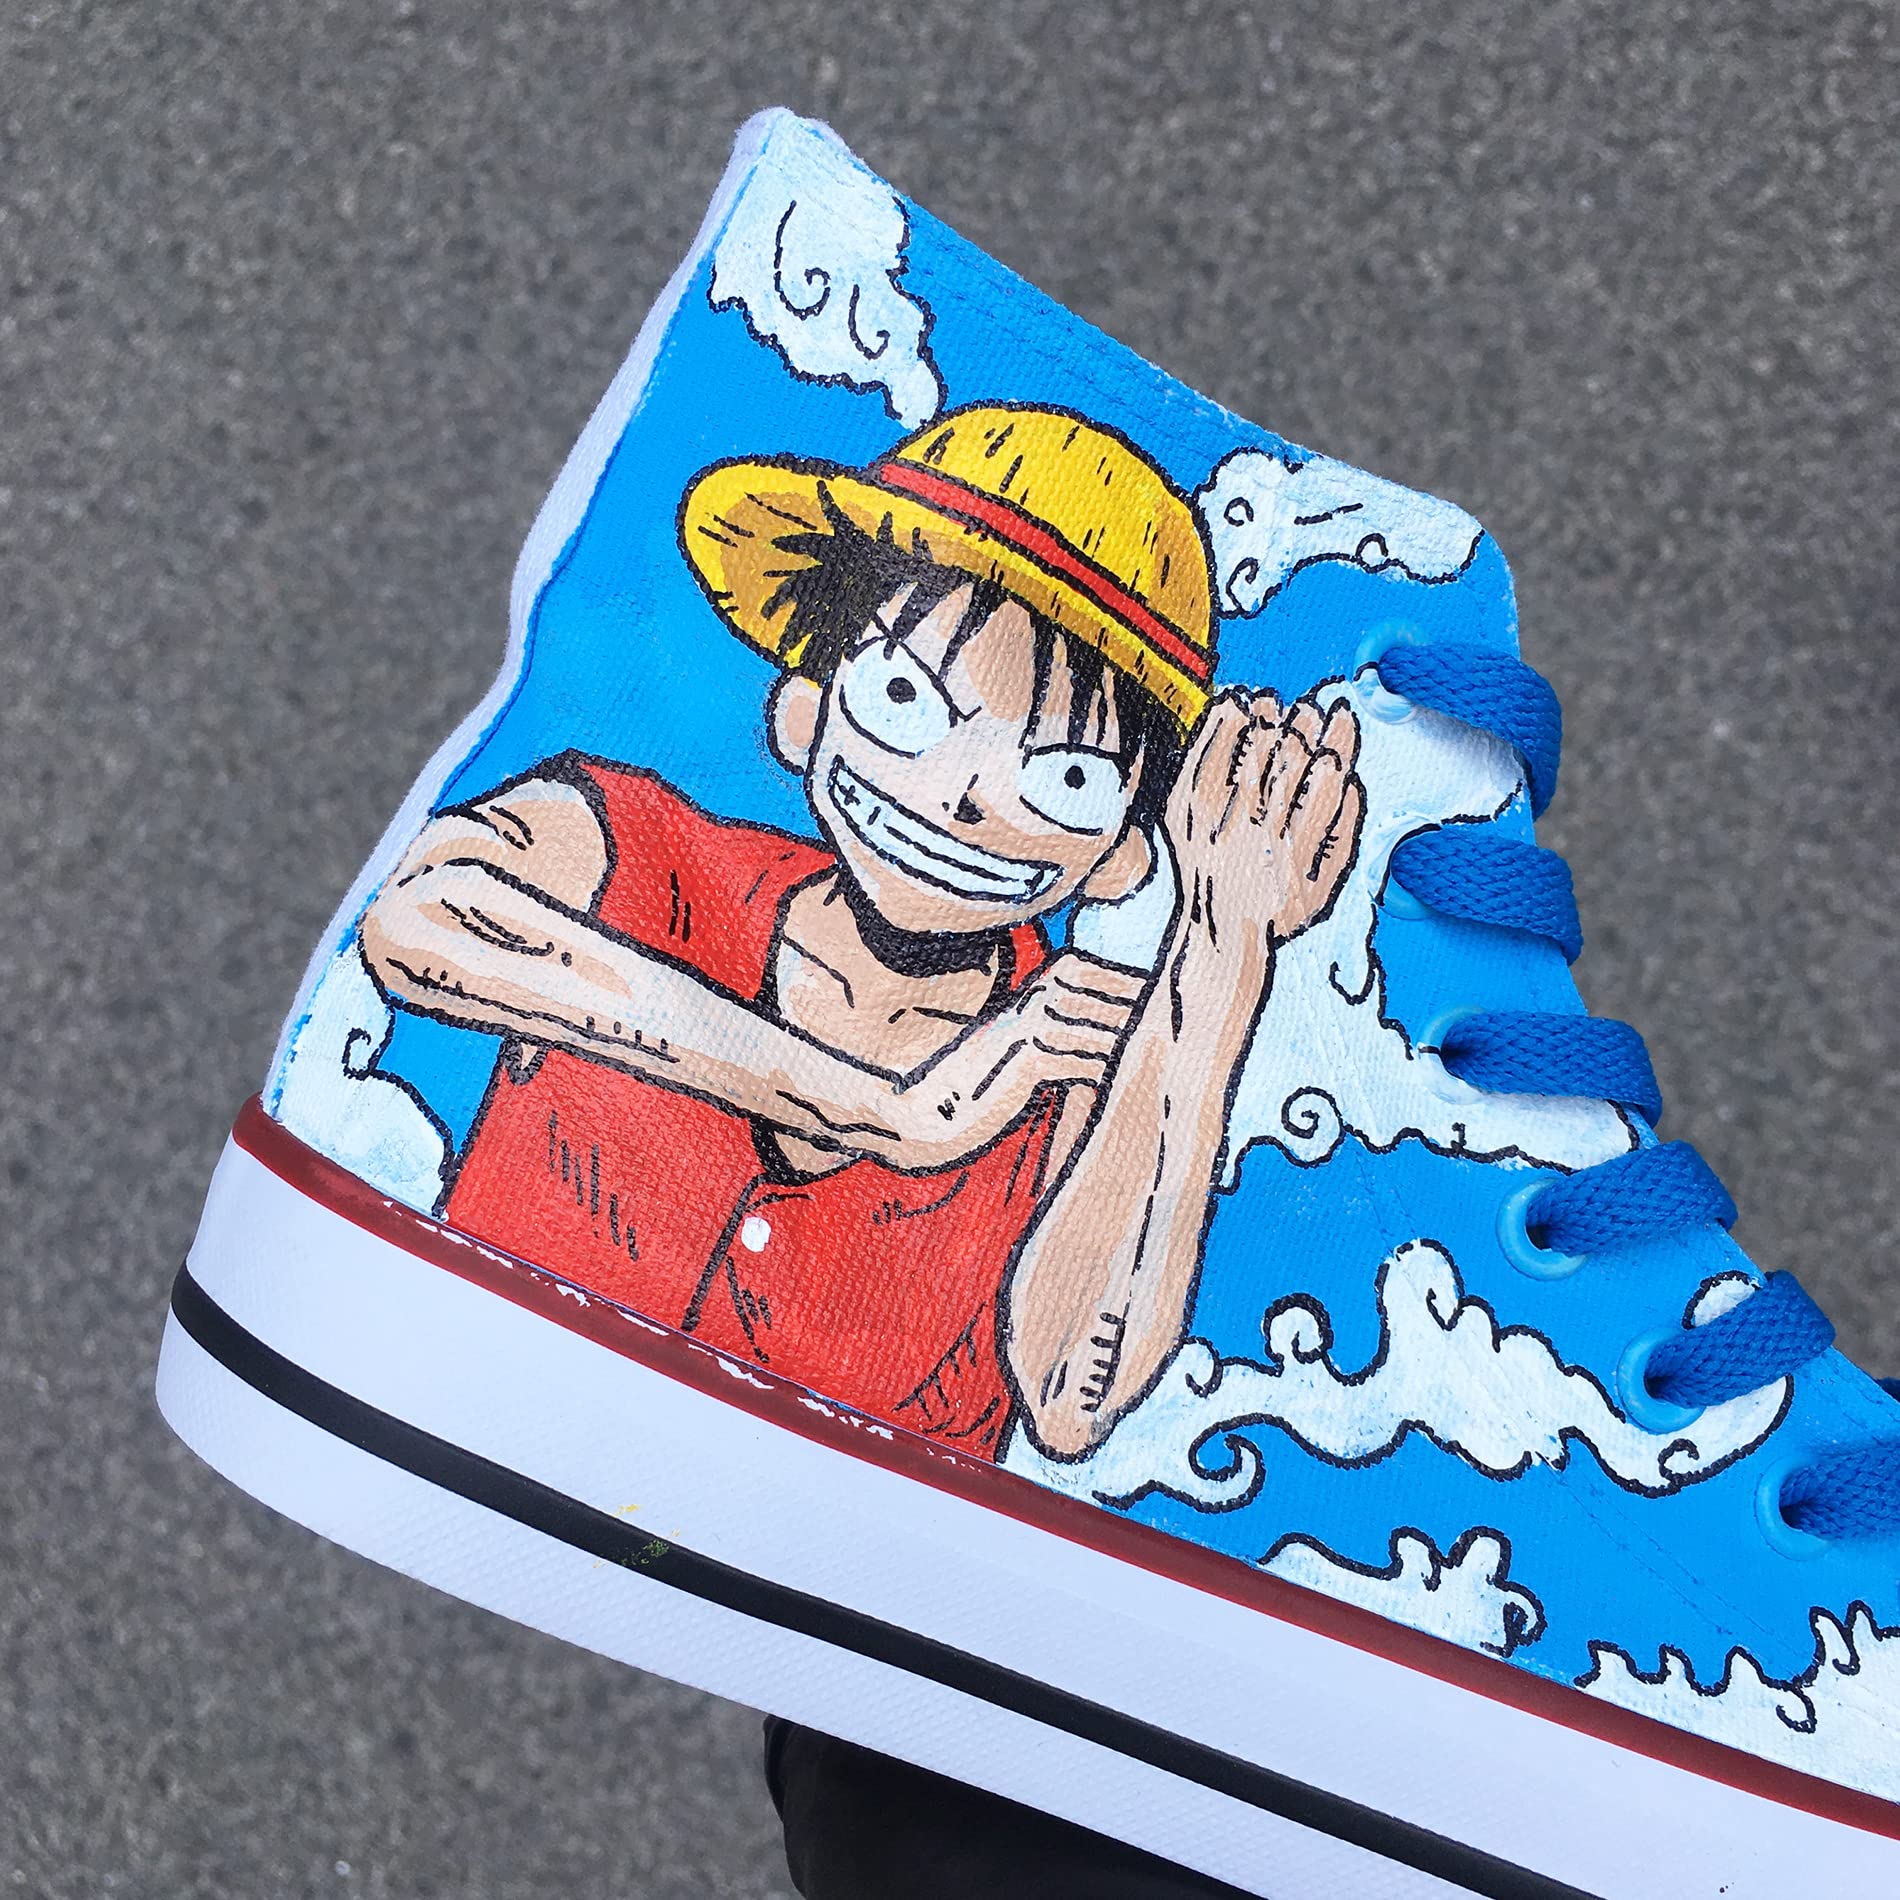 One Piece and VANS Launch First Collab Shoe Line - Crunchyroll News